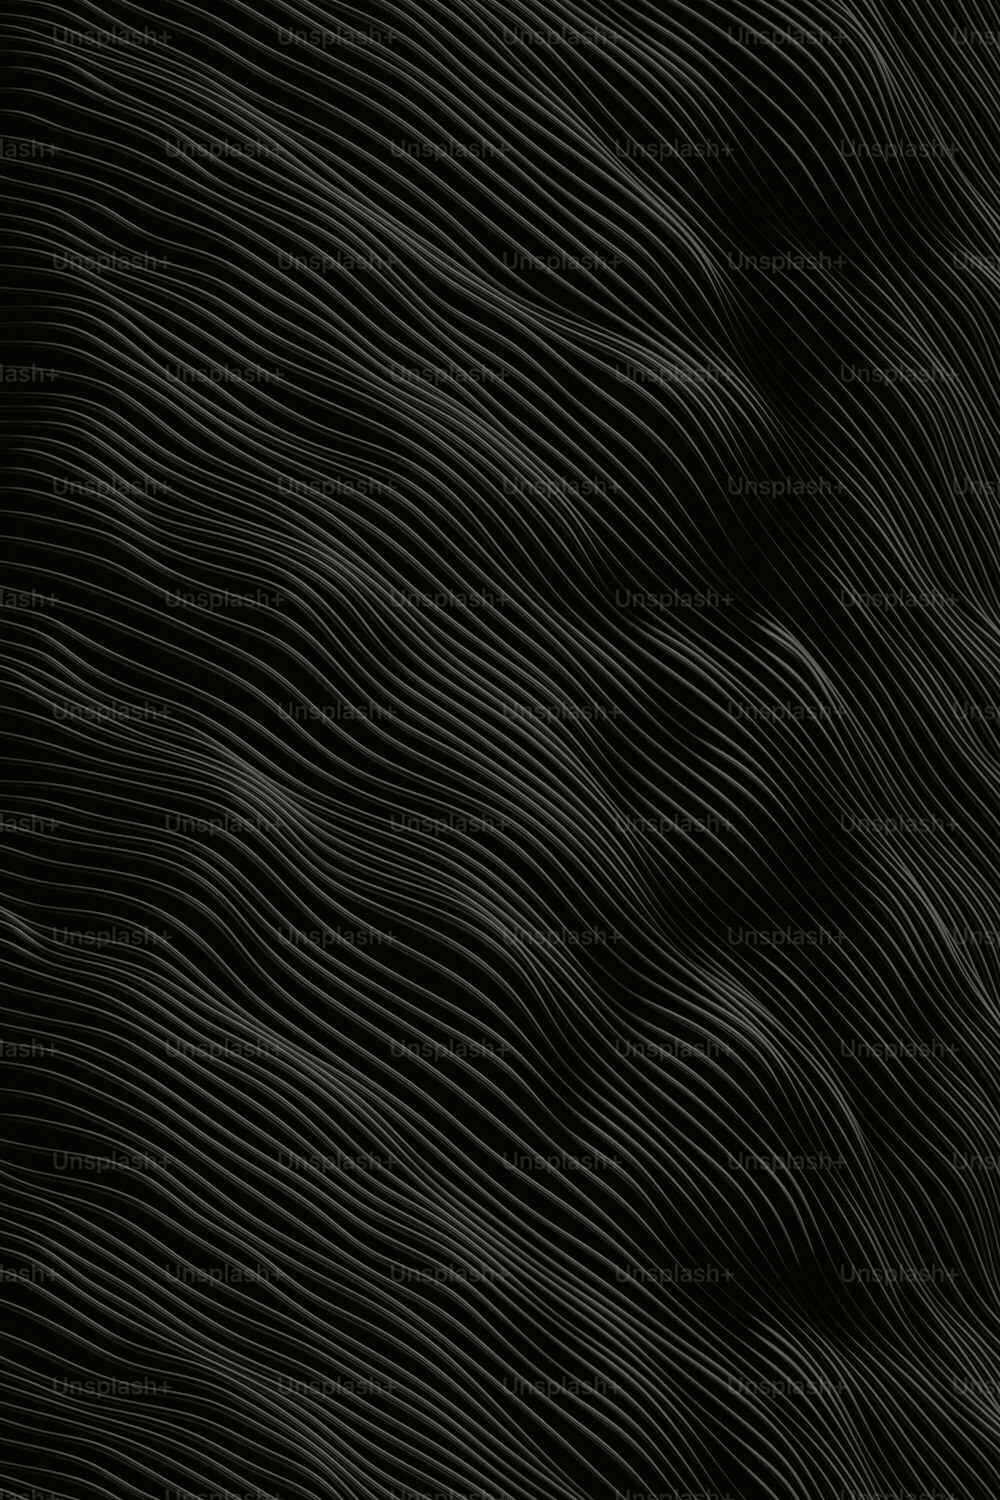 a black and white background with wavy lines